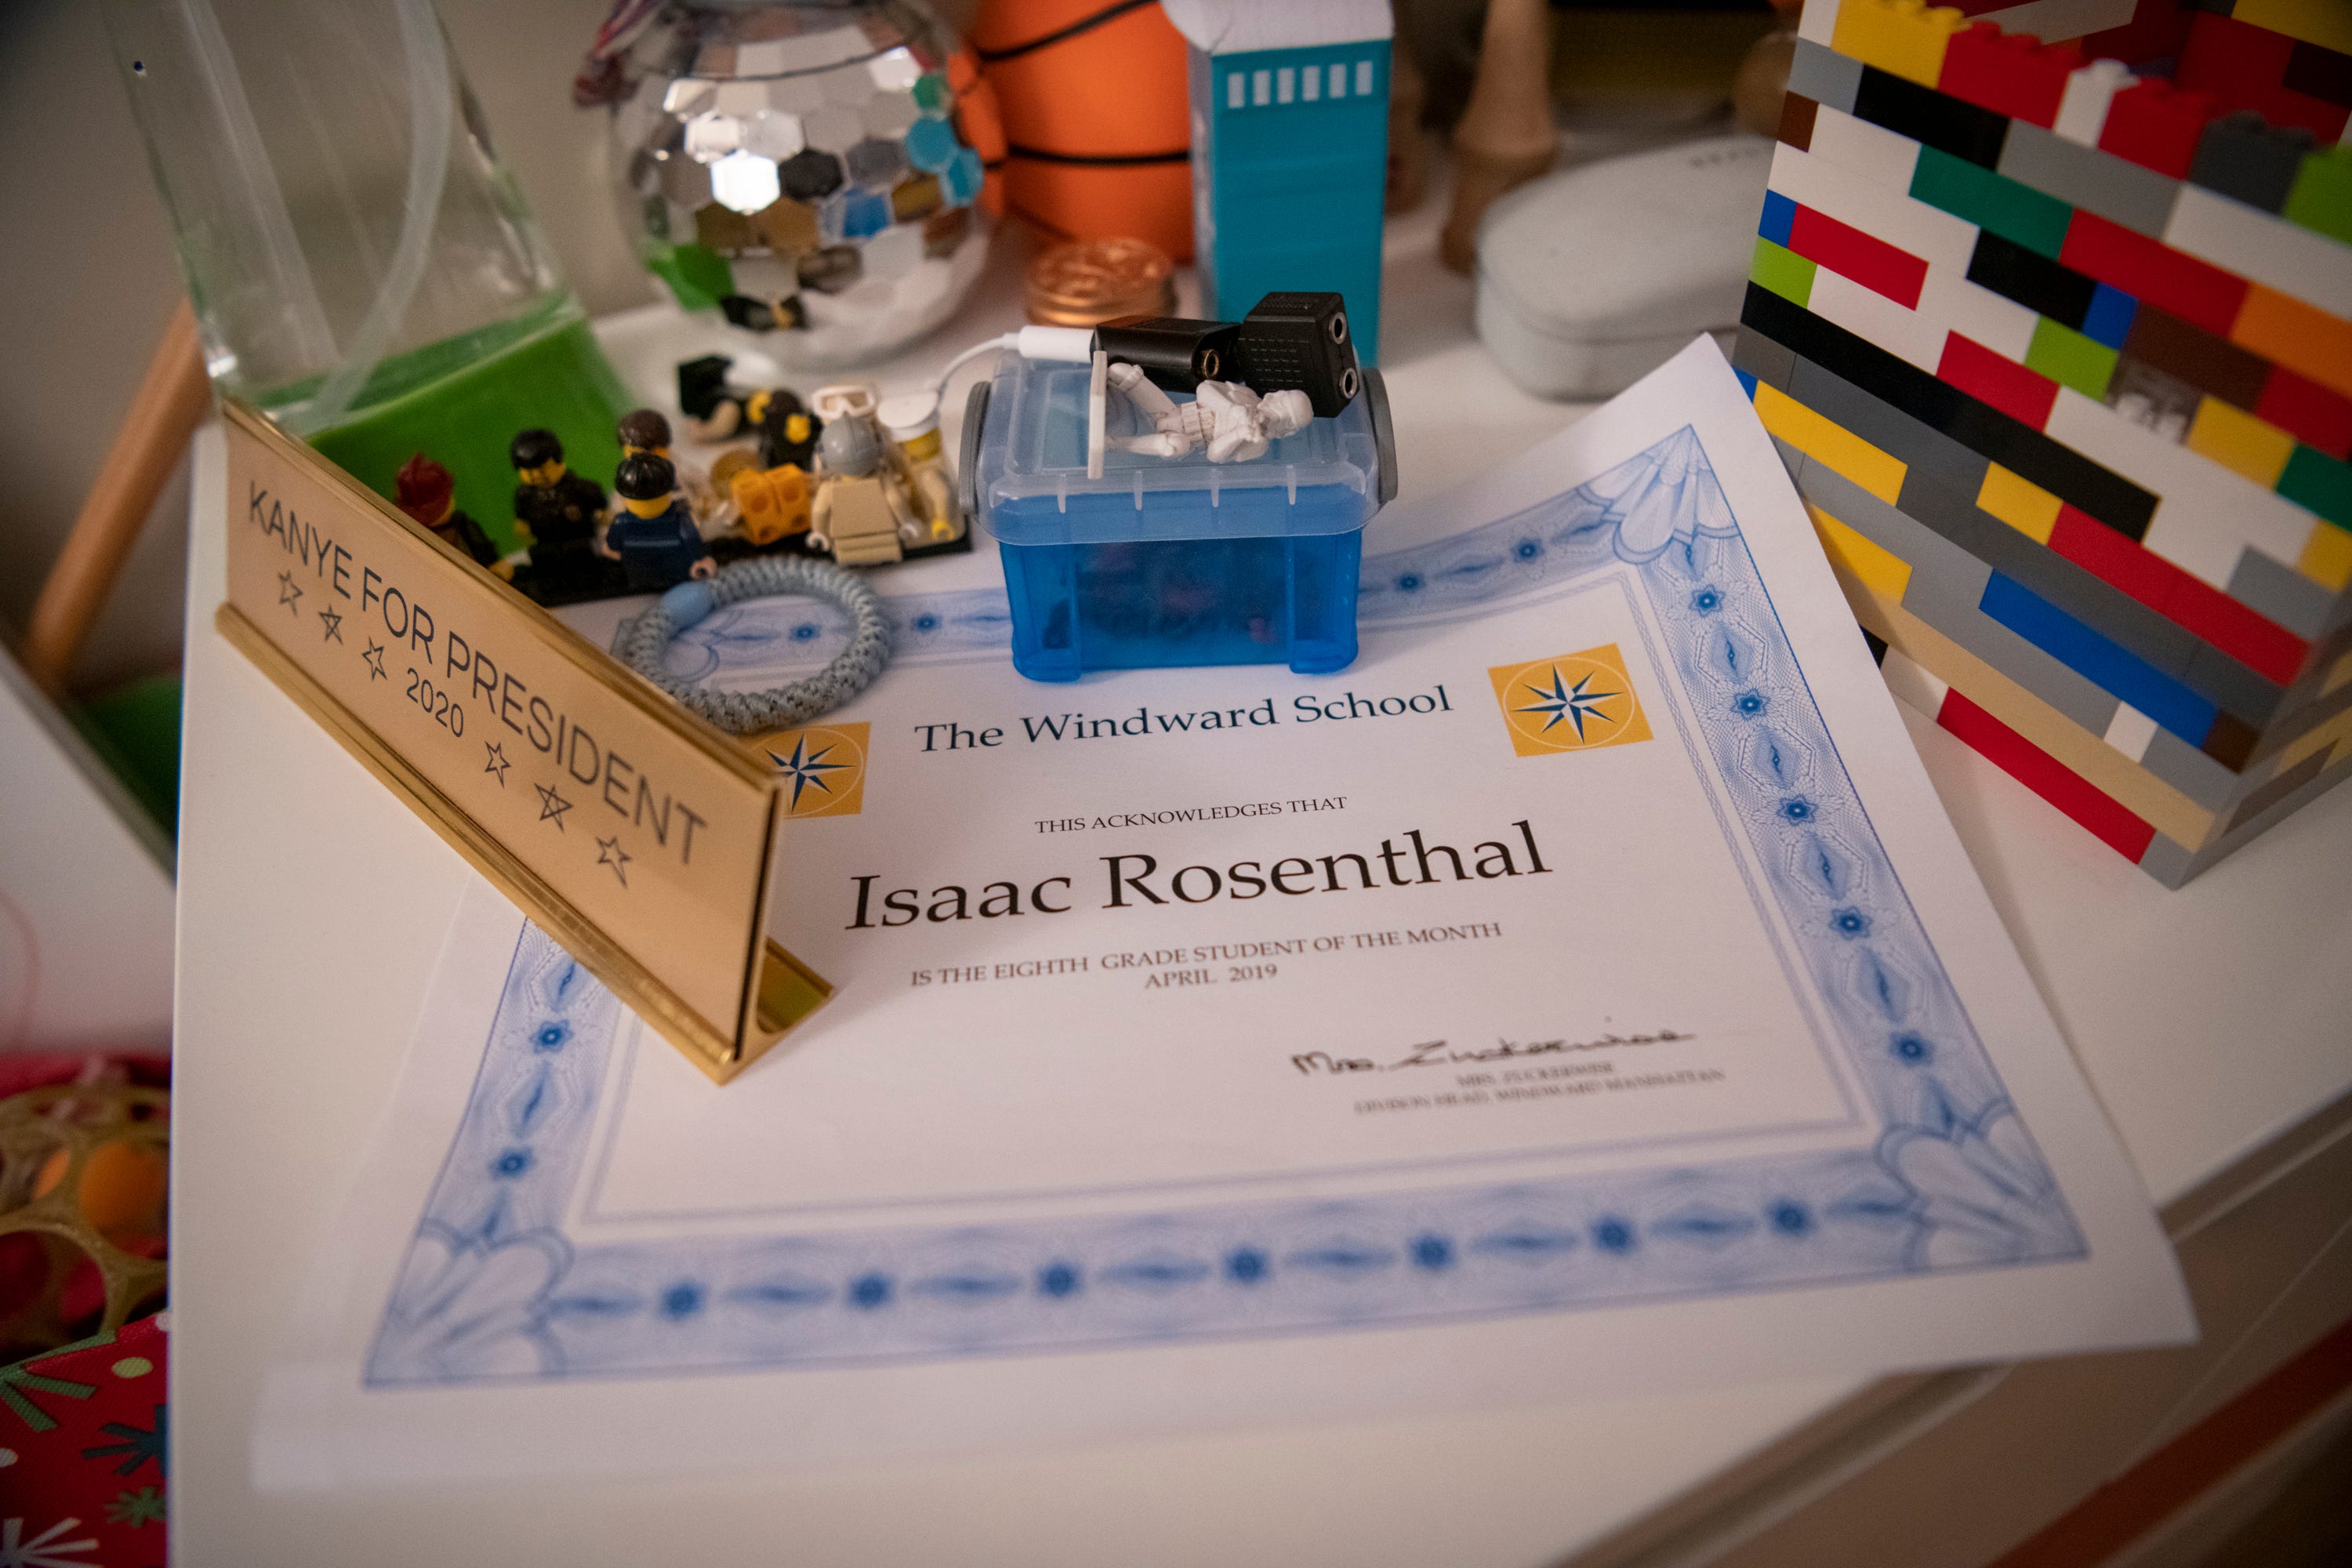 Isaac Rosenthal's award for 8th grade student of the month from April 2019 sits on the dresser in his bedroom among toys and a plaque that reads "Kanye for president 2020," which he says he got before Kanye West became a Republican.